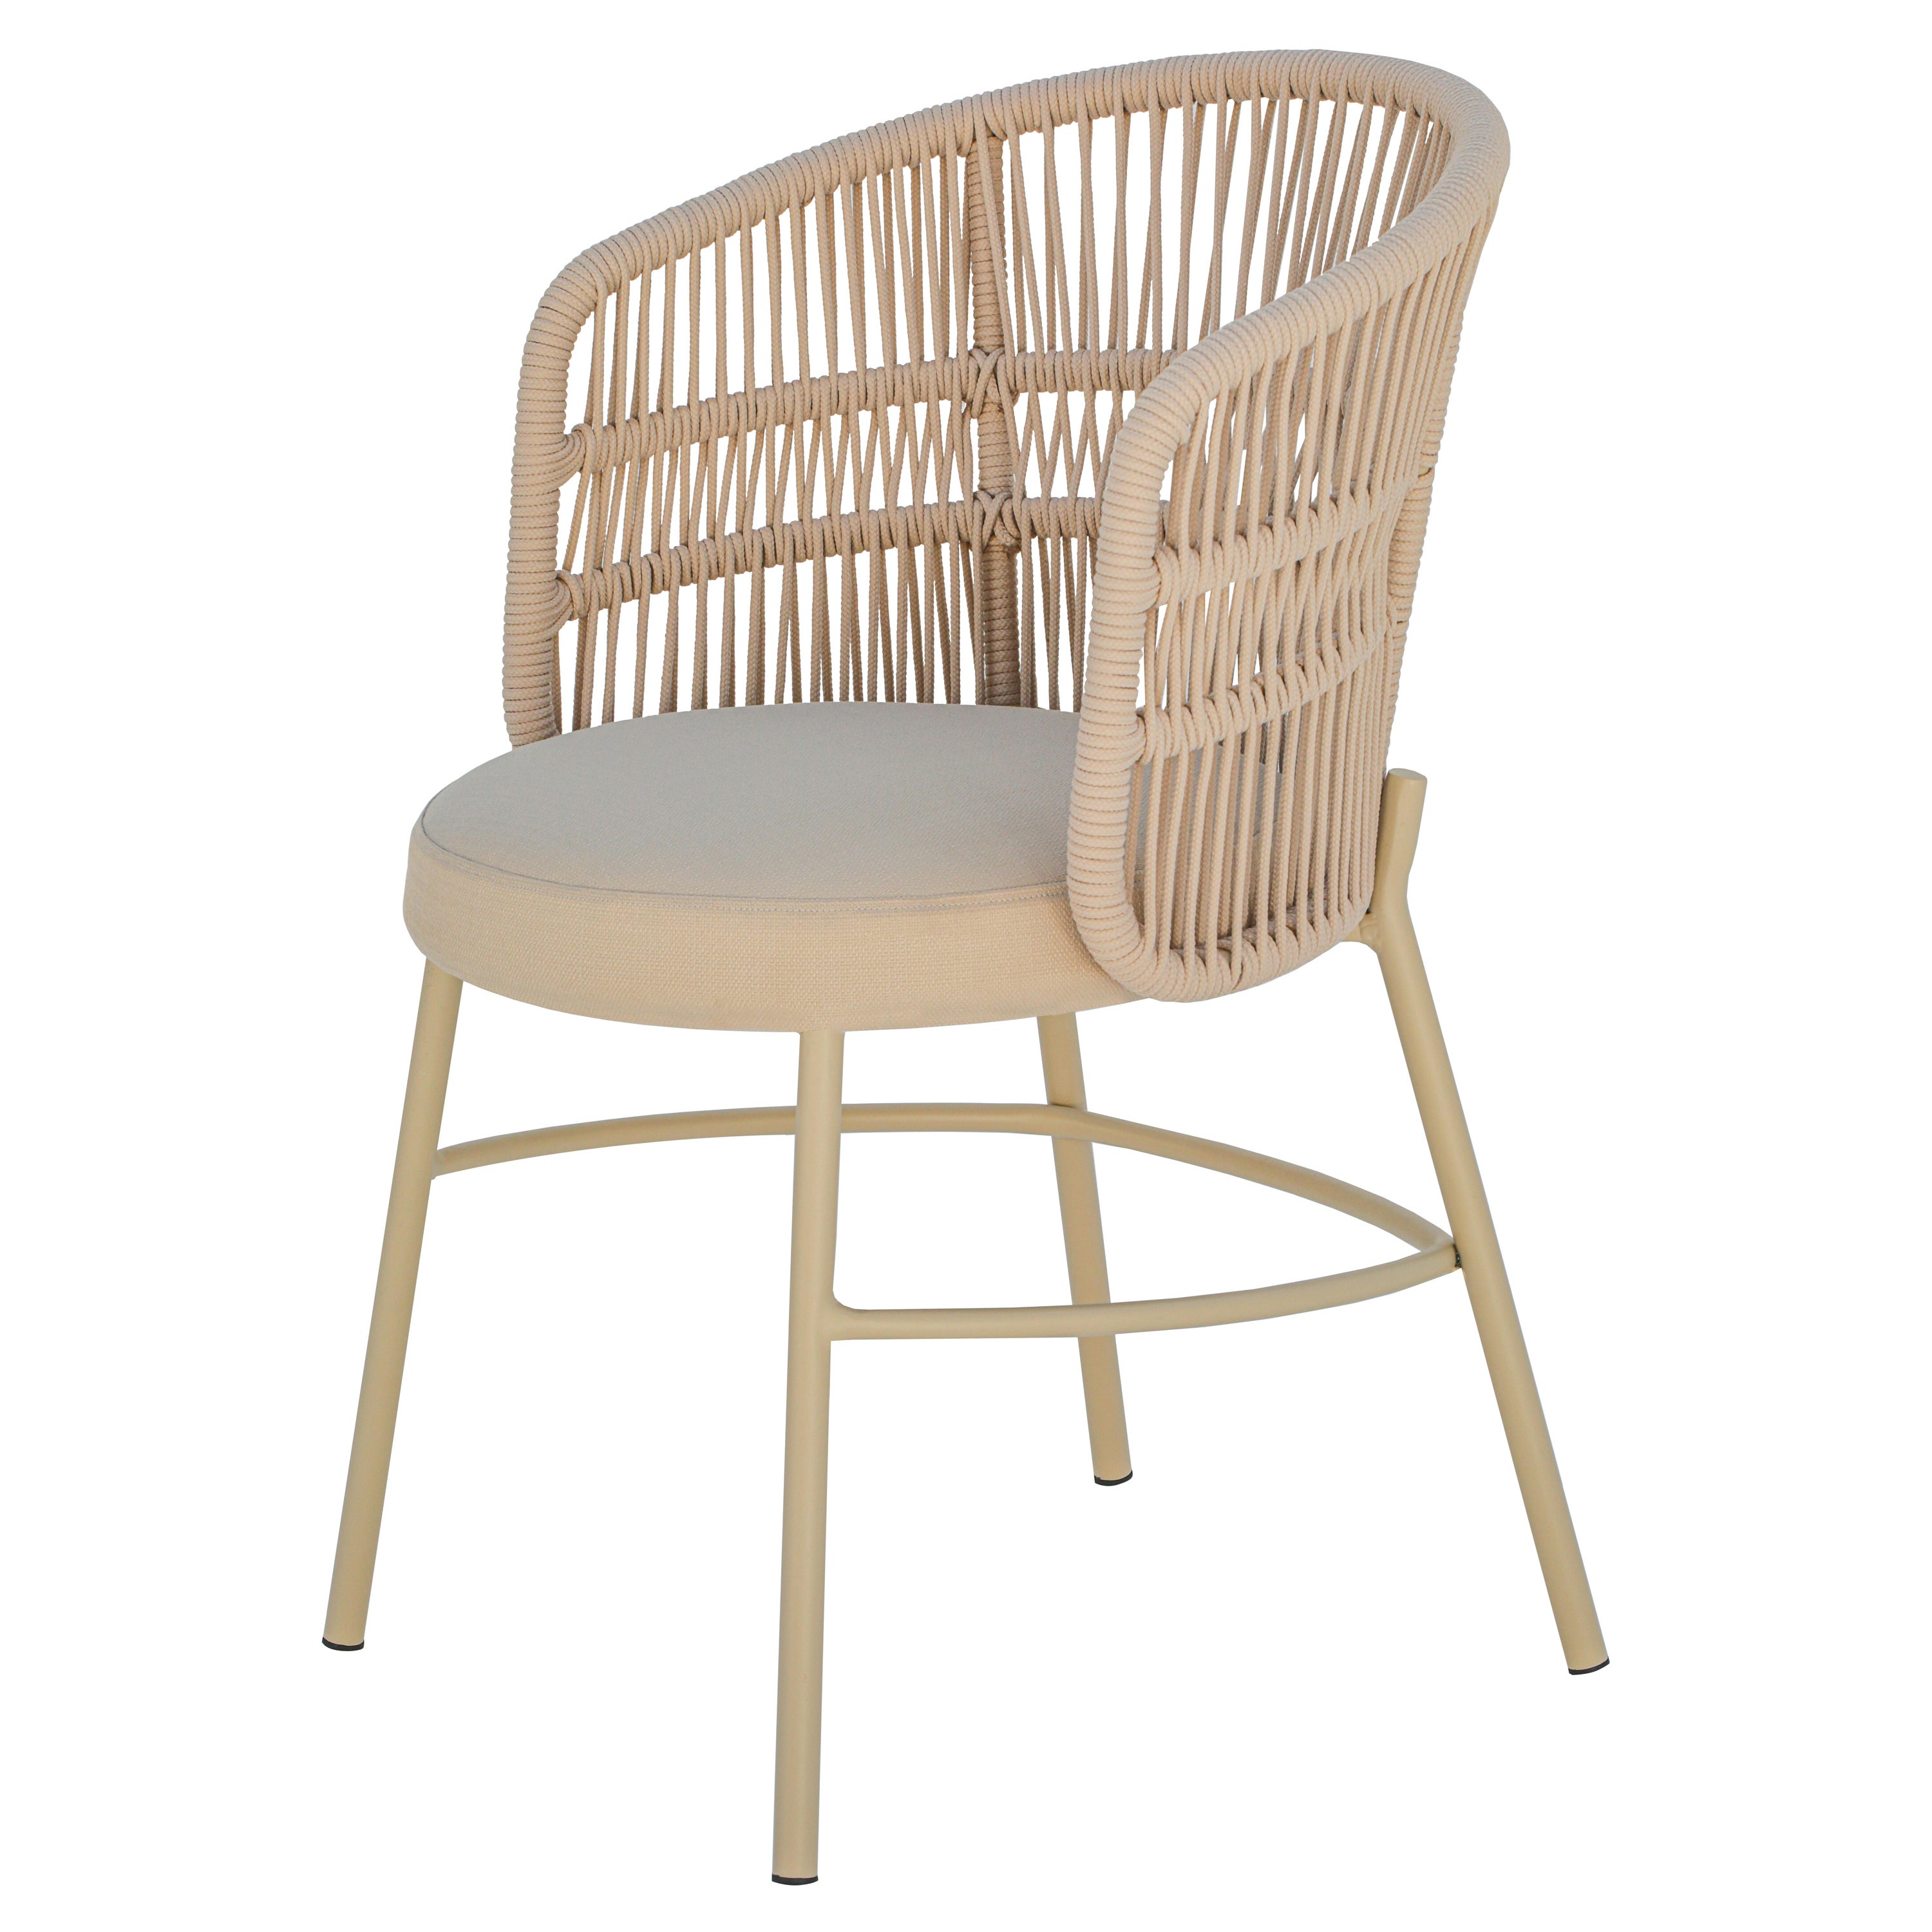 "Amalfi" Outdoor Chair in Aluminum and Nautical Rope Handmade For Sale